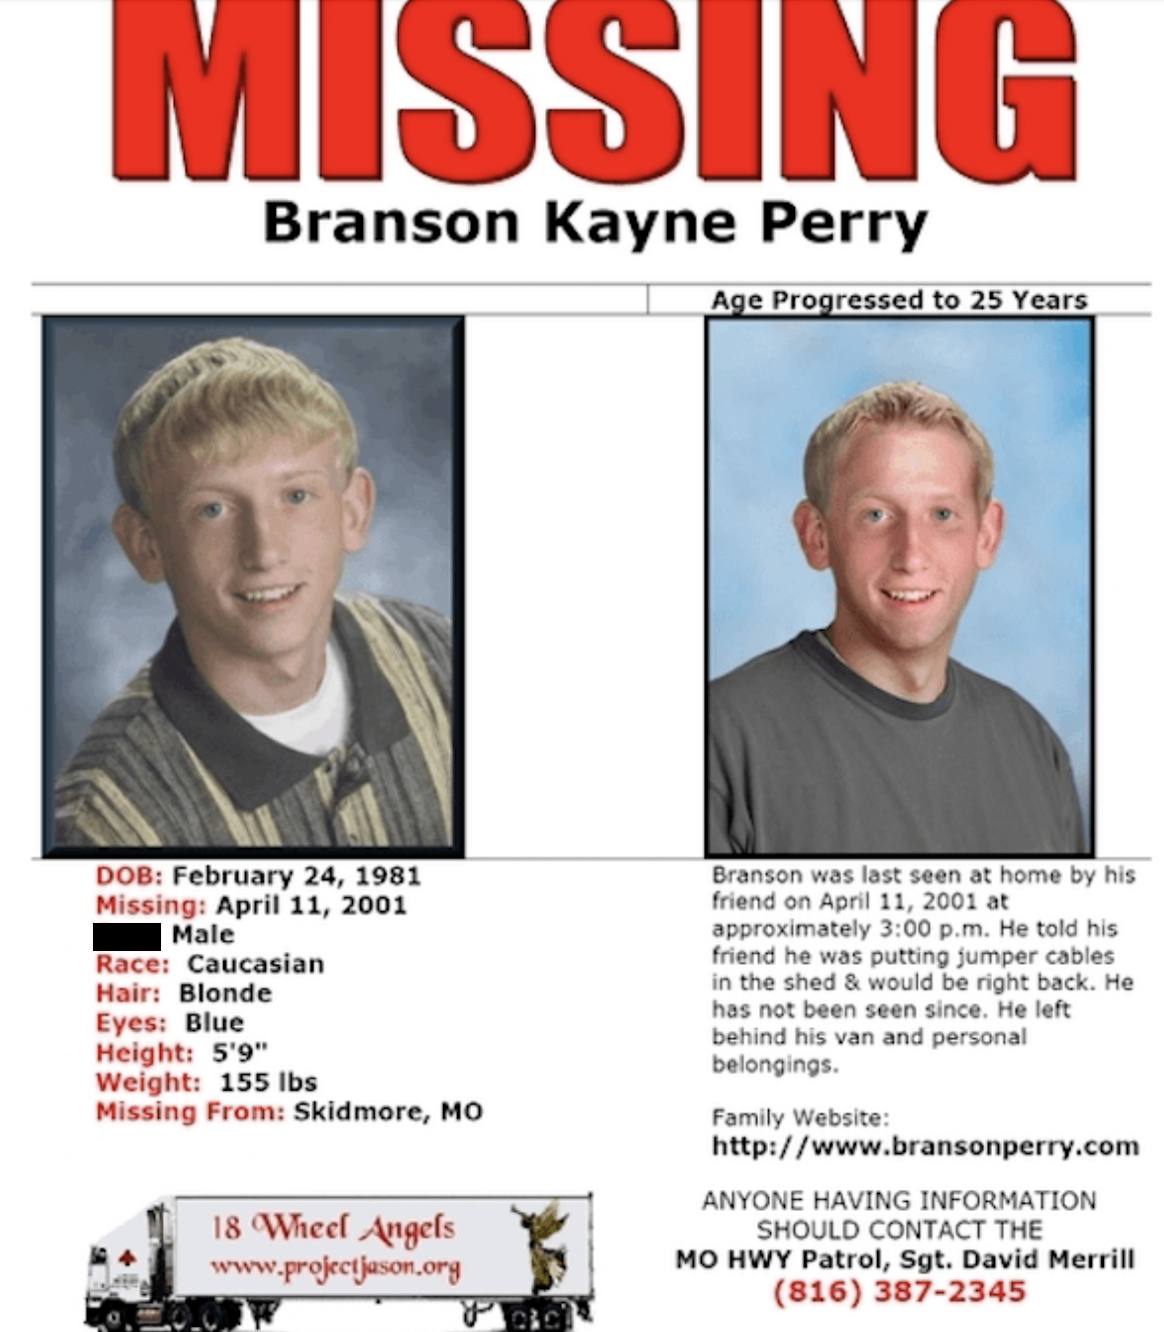 “Branson Perry, aged 20, disappeared from Skidmore, Missouri in April 2001. He was working on his house with a friend, went to the shed to grab some power cords and was never seen again.”